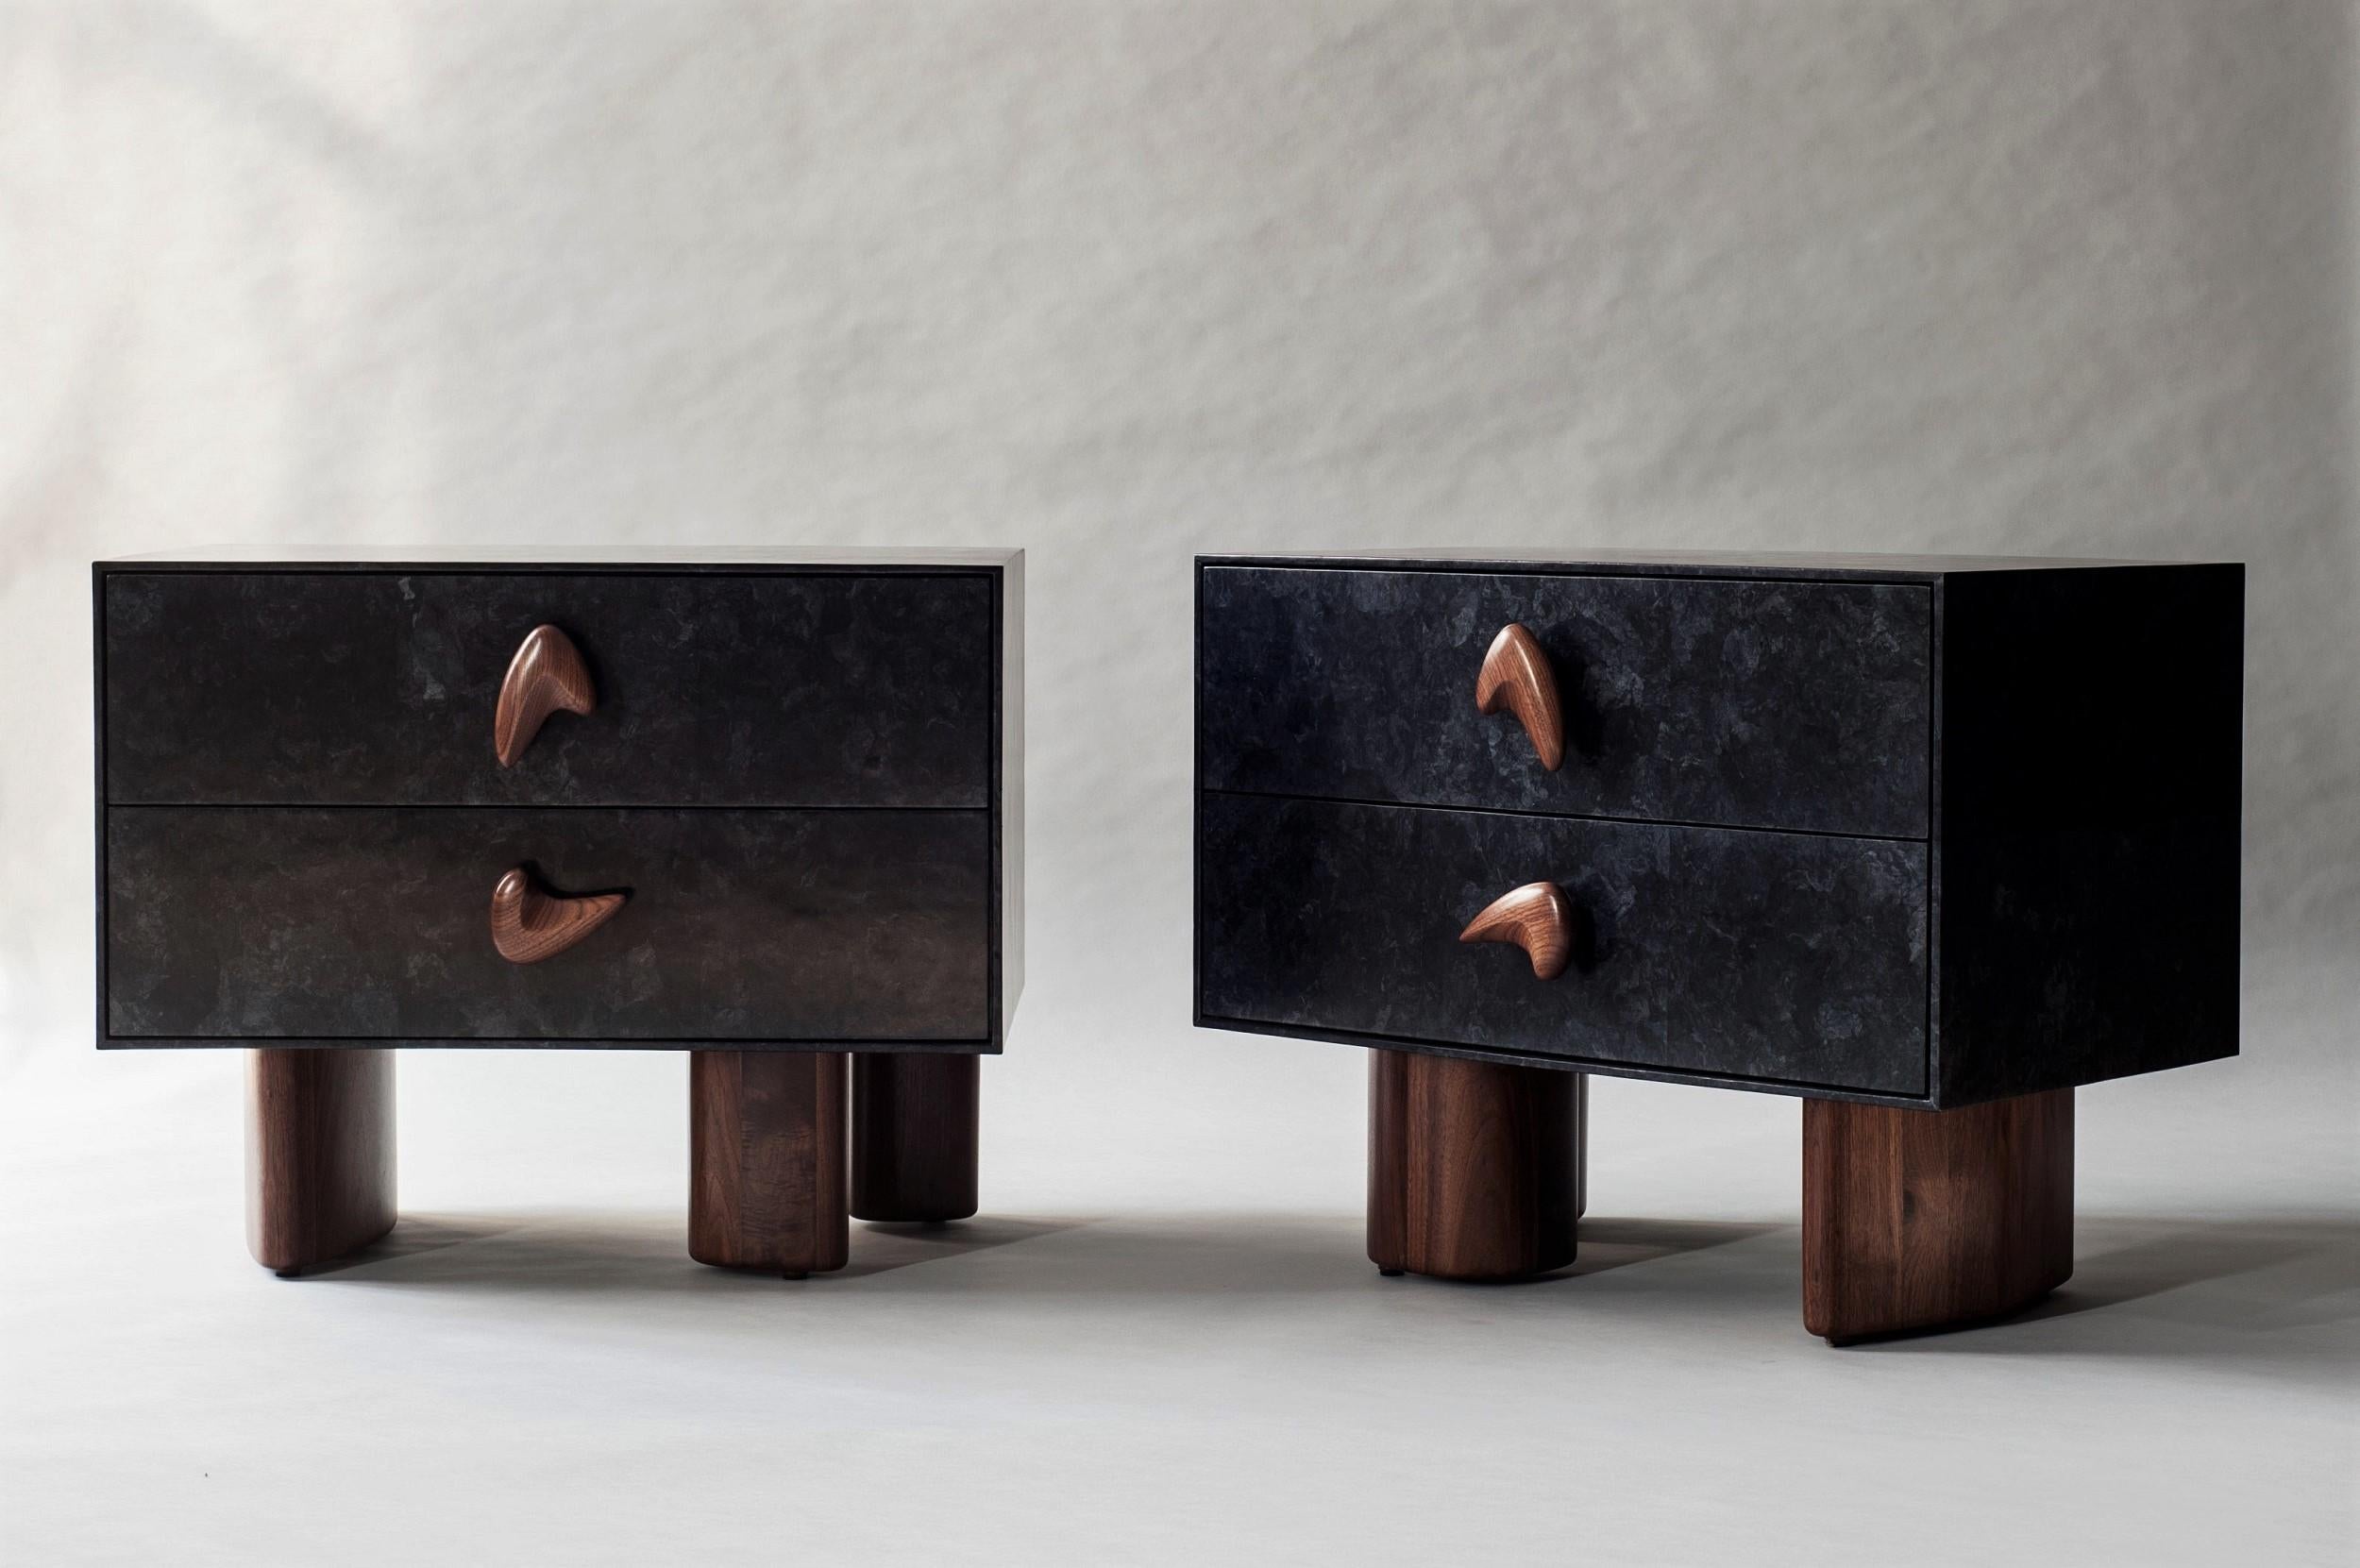 Inspired by the graphic motifs of Le Corbusier's mural paintings, the solid form of the Corbu bedside table is defined by rhythmically placed handles. Architectural legs lend support and an unexpected element of asymmetry.

This listing is for an